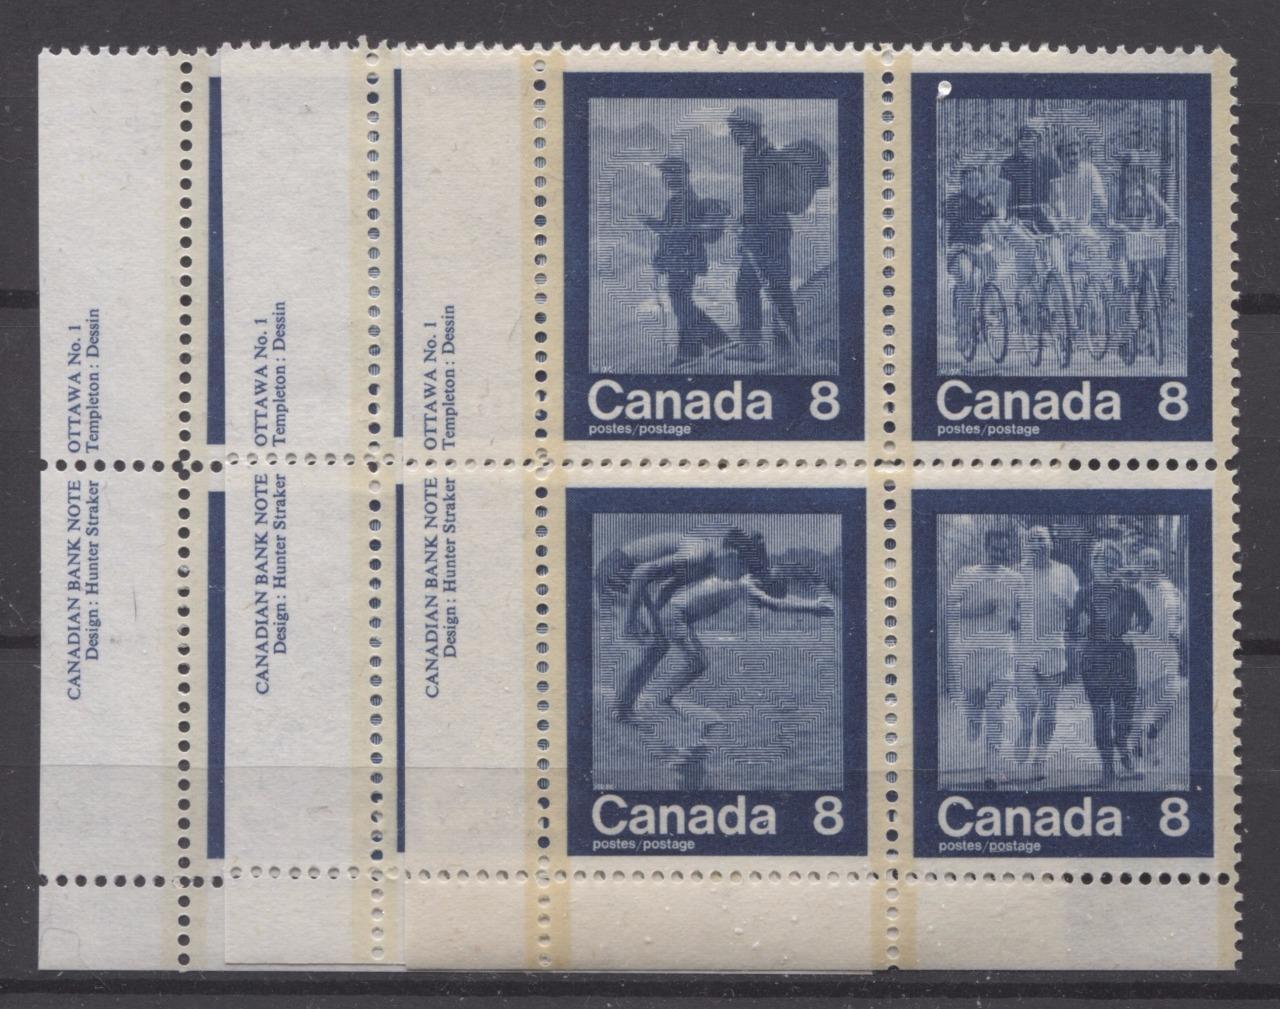 Canada #632a (SG#768a) 1974 Summer Sports Issue Block of 4 Paper/Tag Type 3 Plate 1 UL VF-80 NH Brixton Chrome 